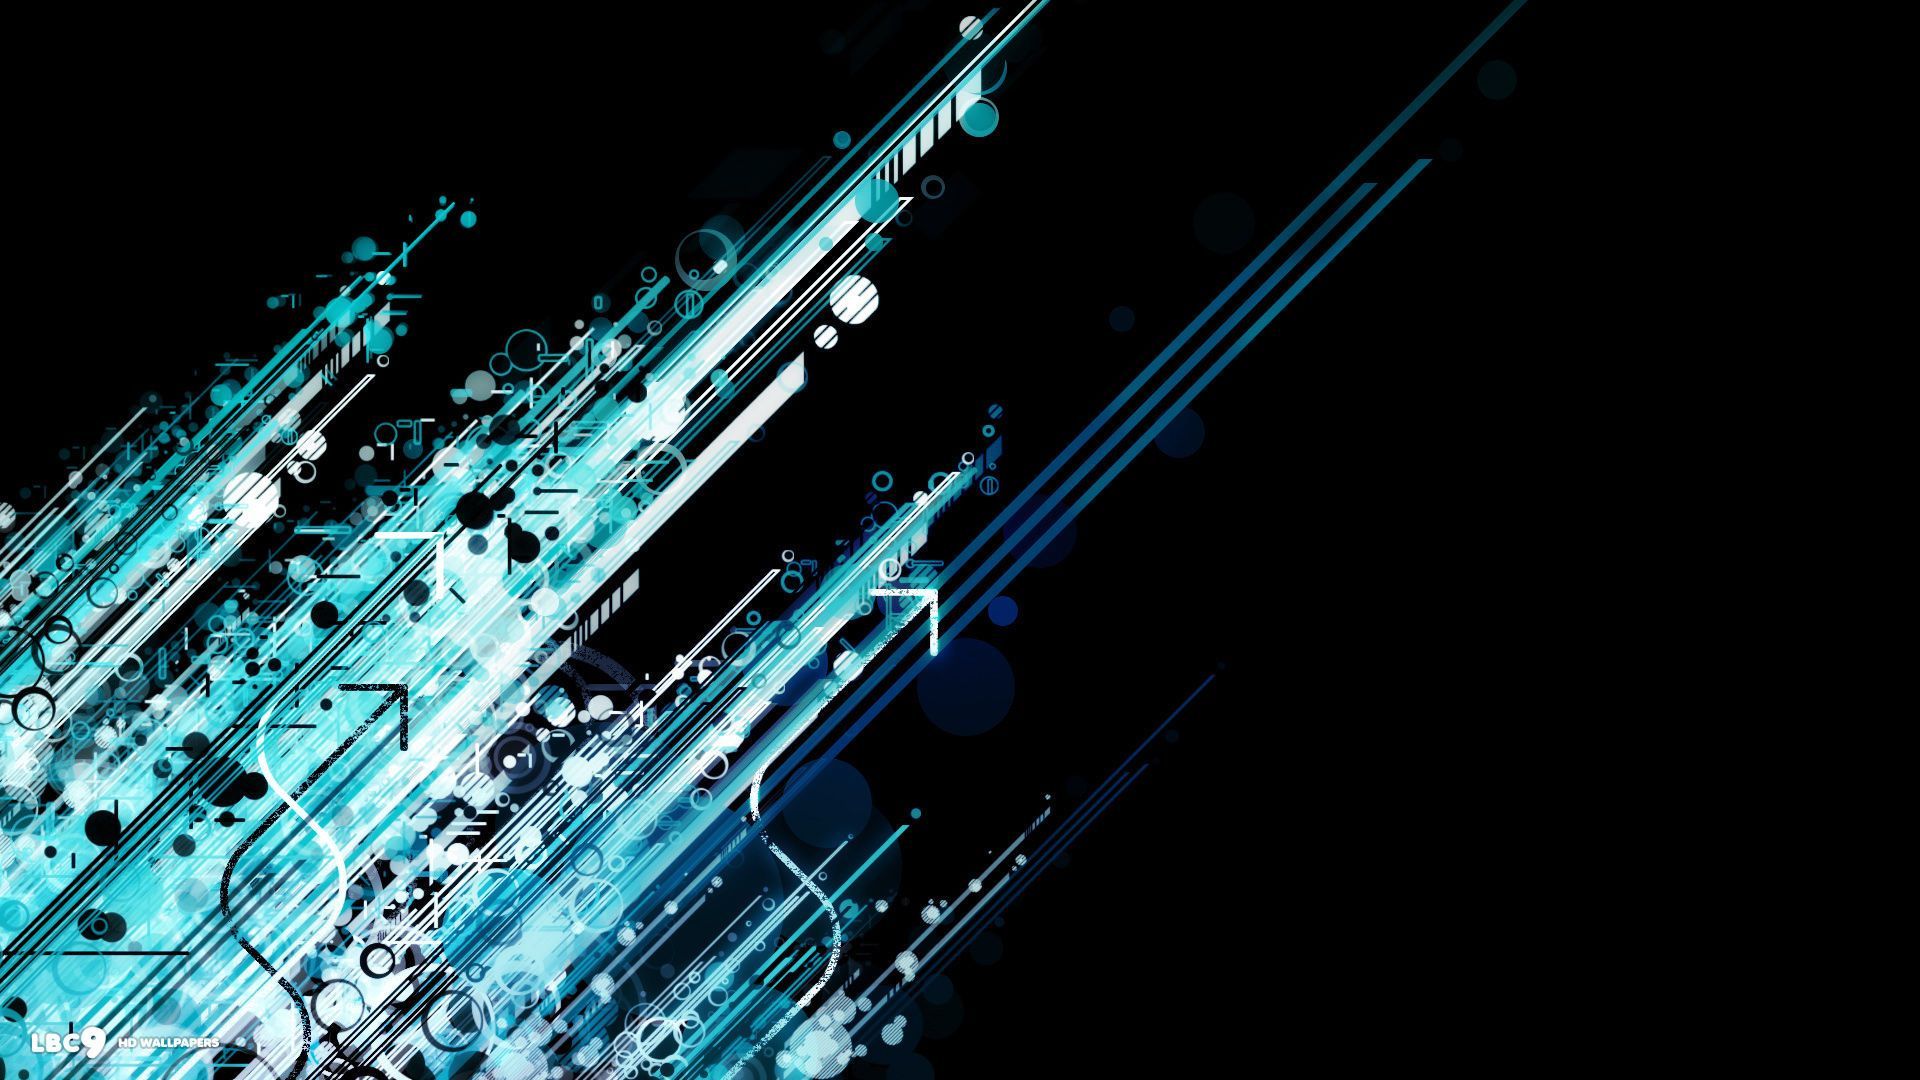 Abstract Wallpaper 19 21. Vector HD Background